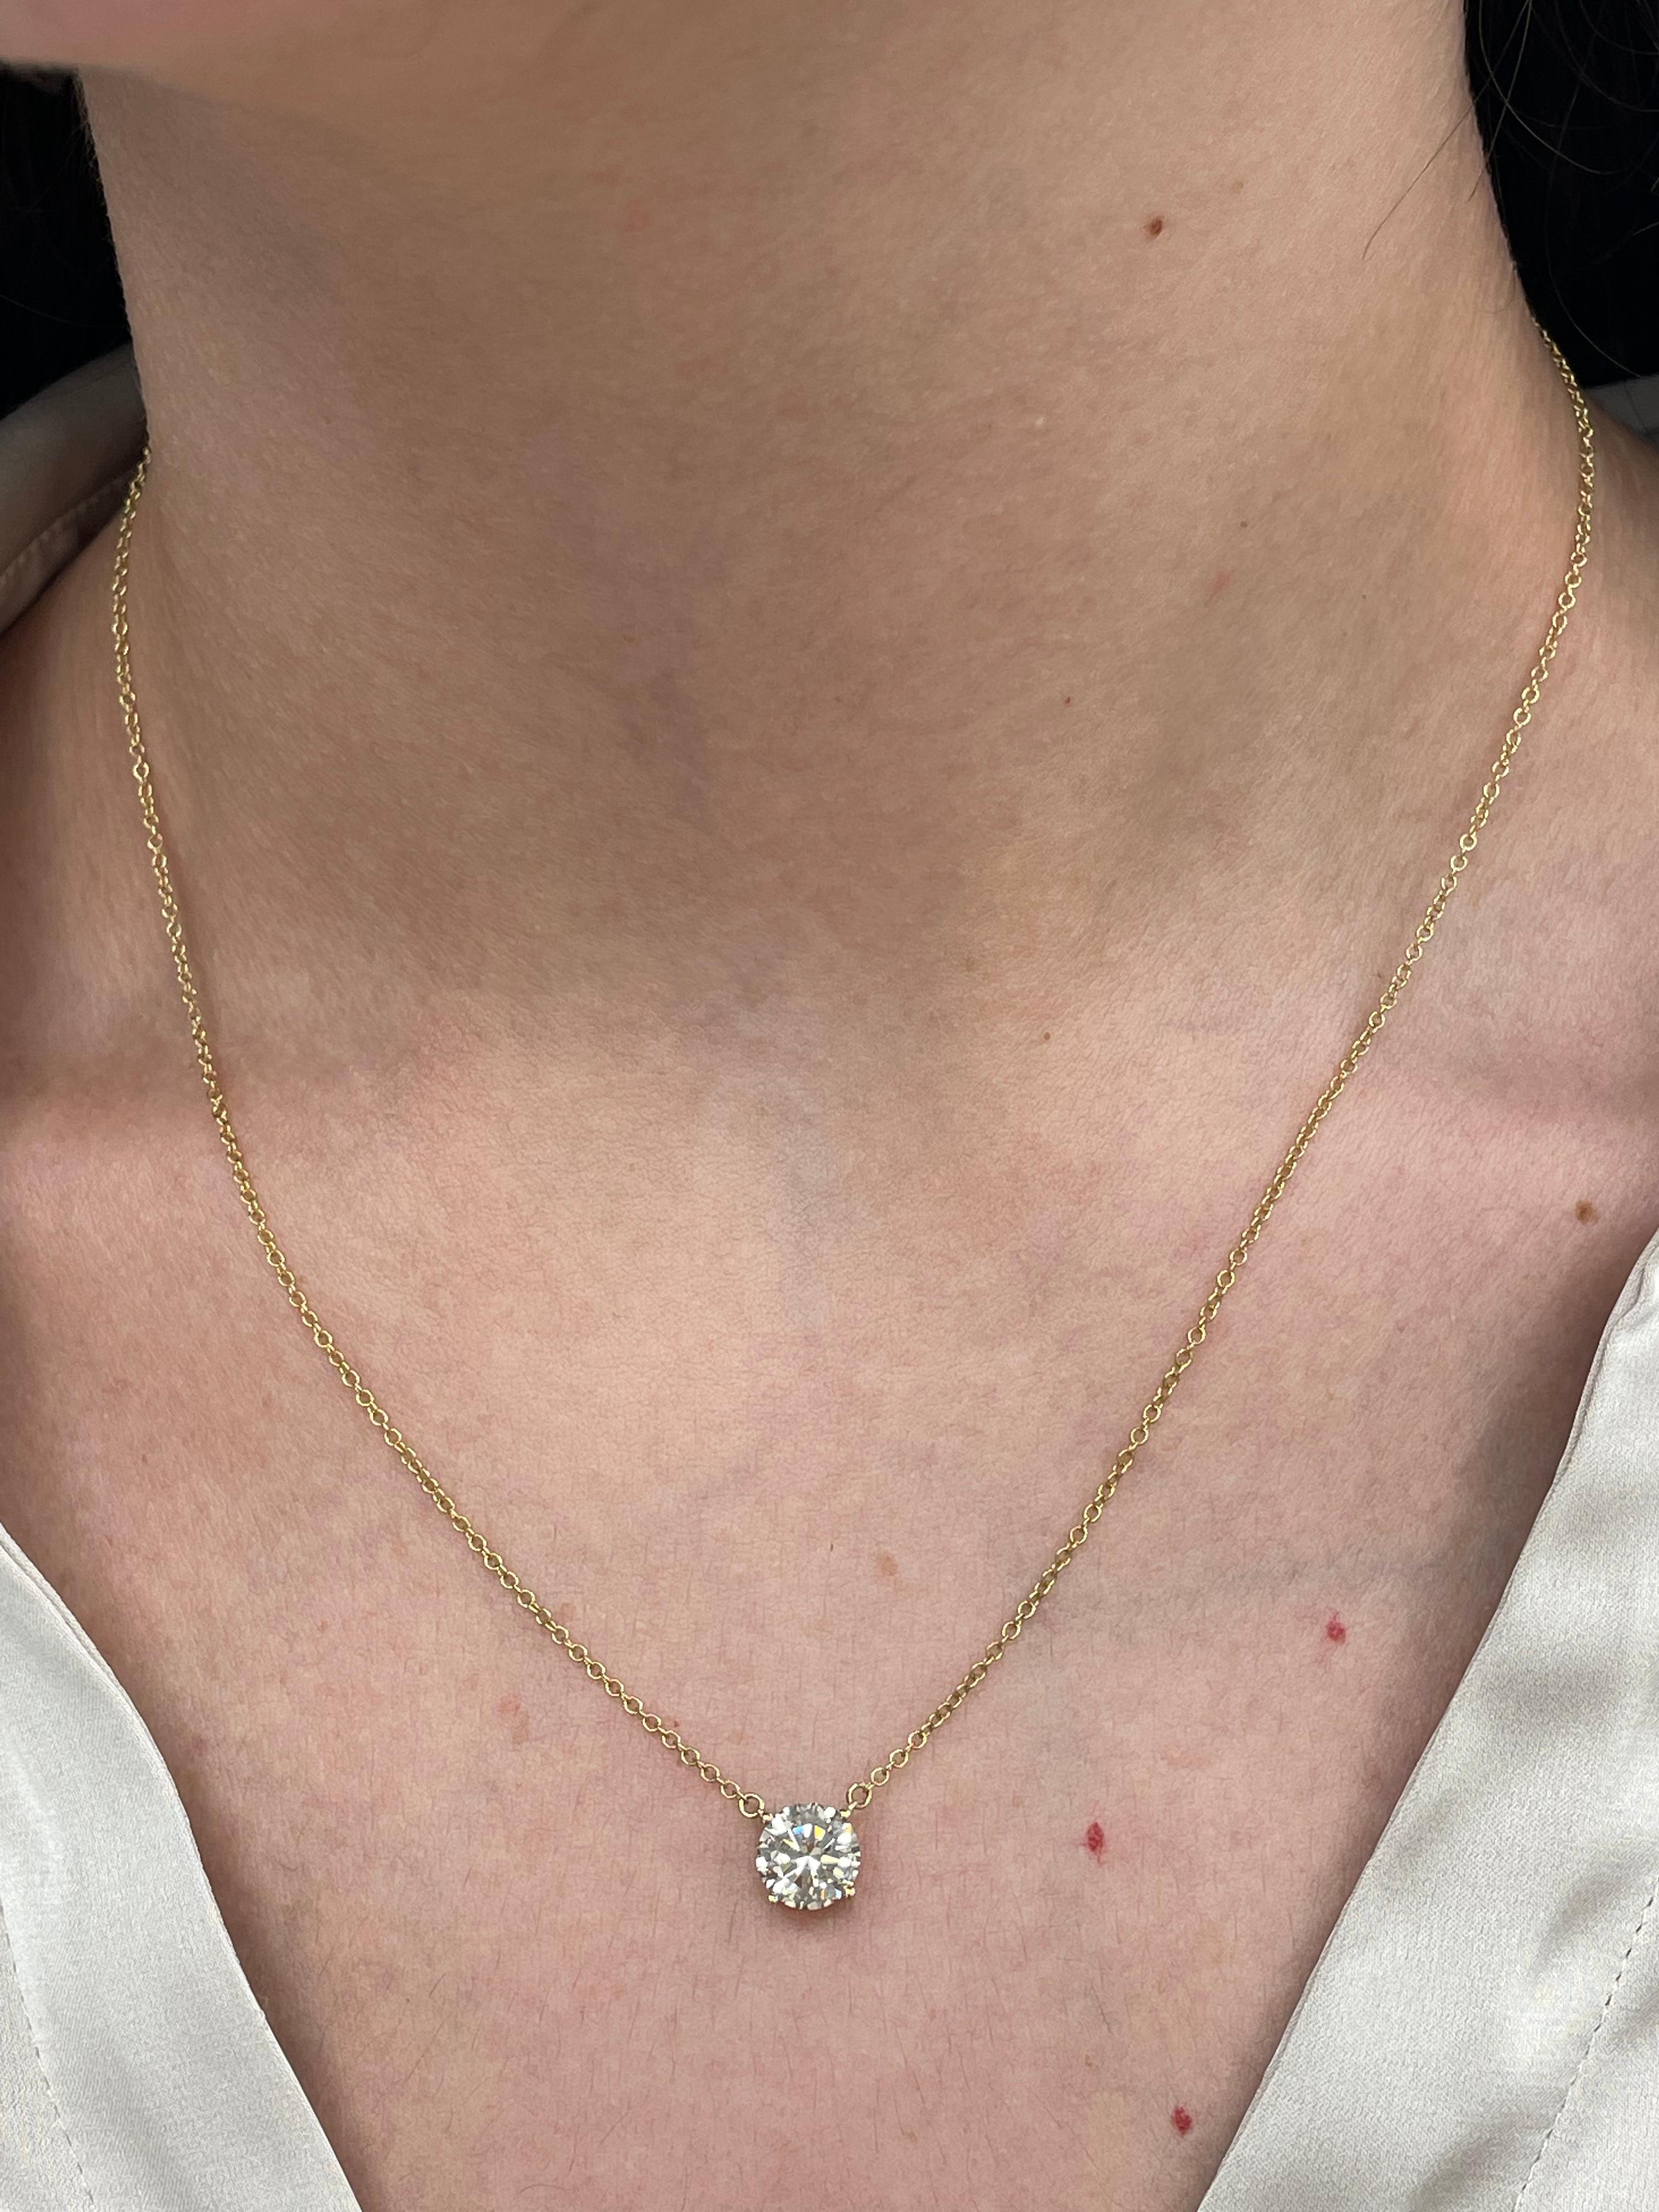 Beautiful classic diamond pendant necklace. Simple, modern, and classic. By Alexander Beverly Hills.
1.51 carat round brilliant cut diamond. Approximately J color grade and SI clarity grade. 14-karat yellow gold, 4.09 grams, 16-18